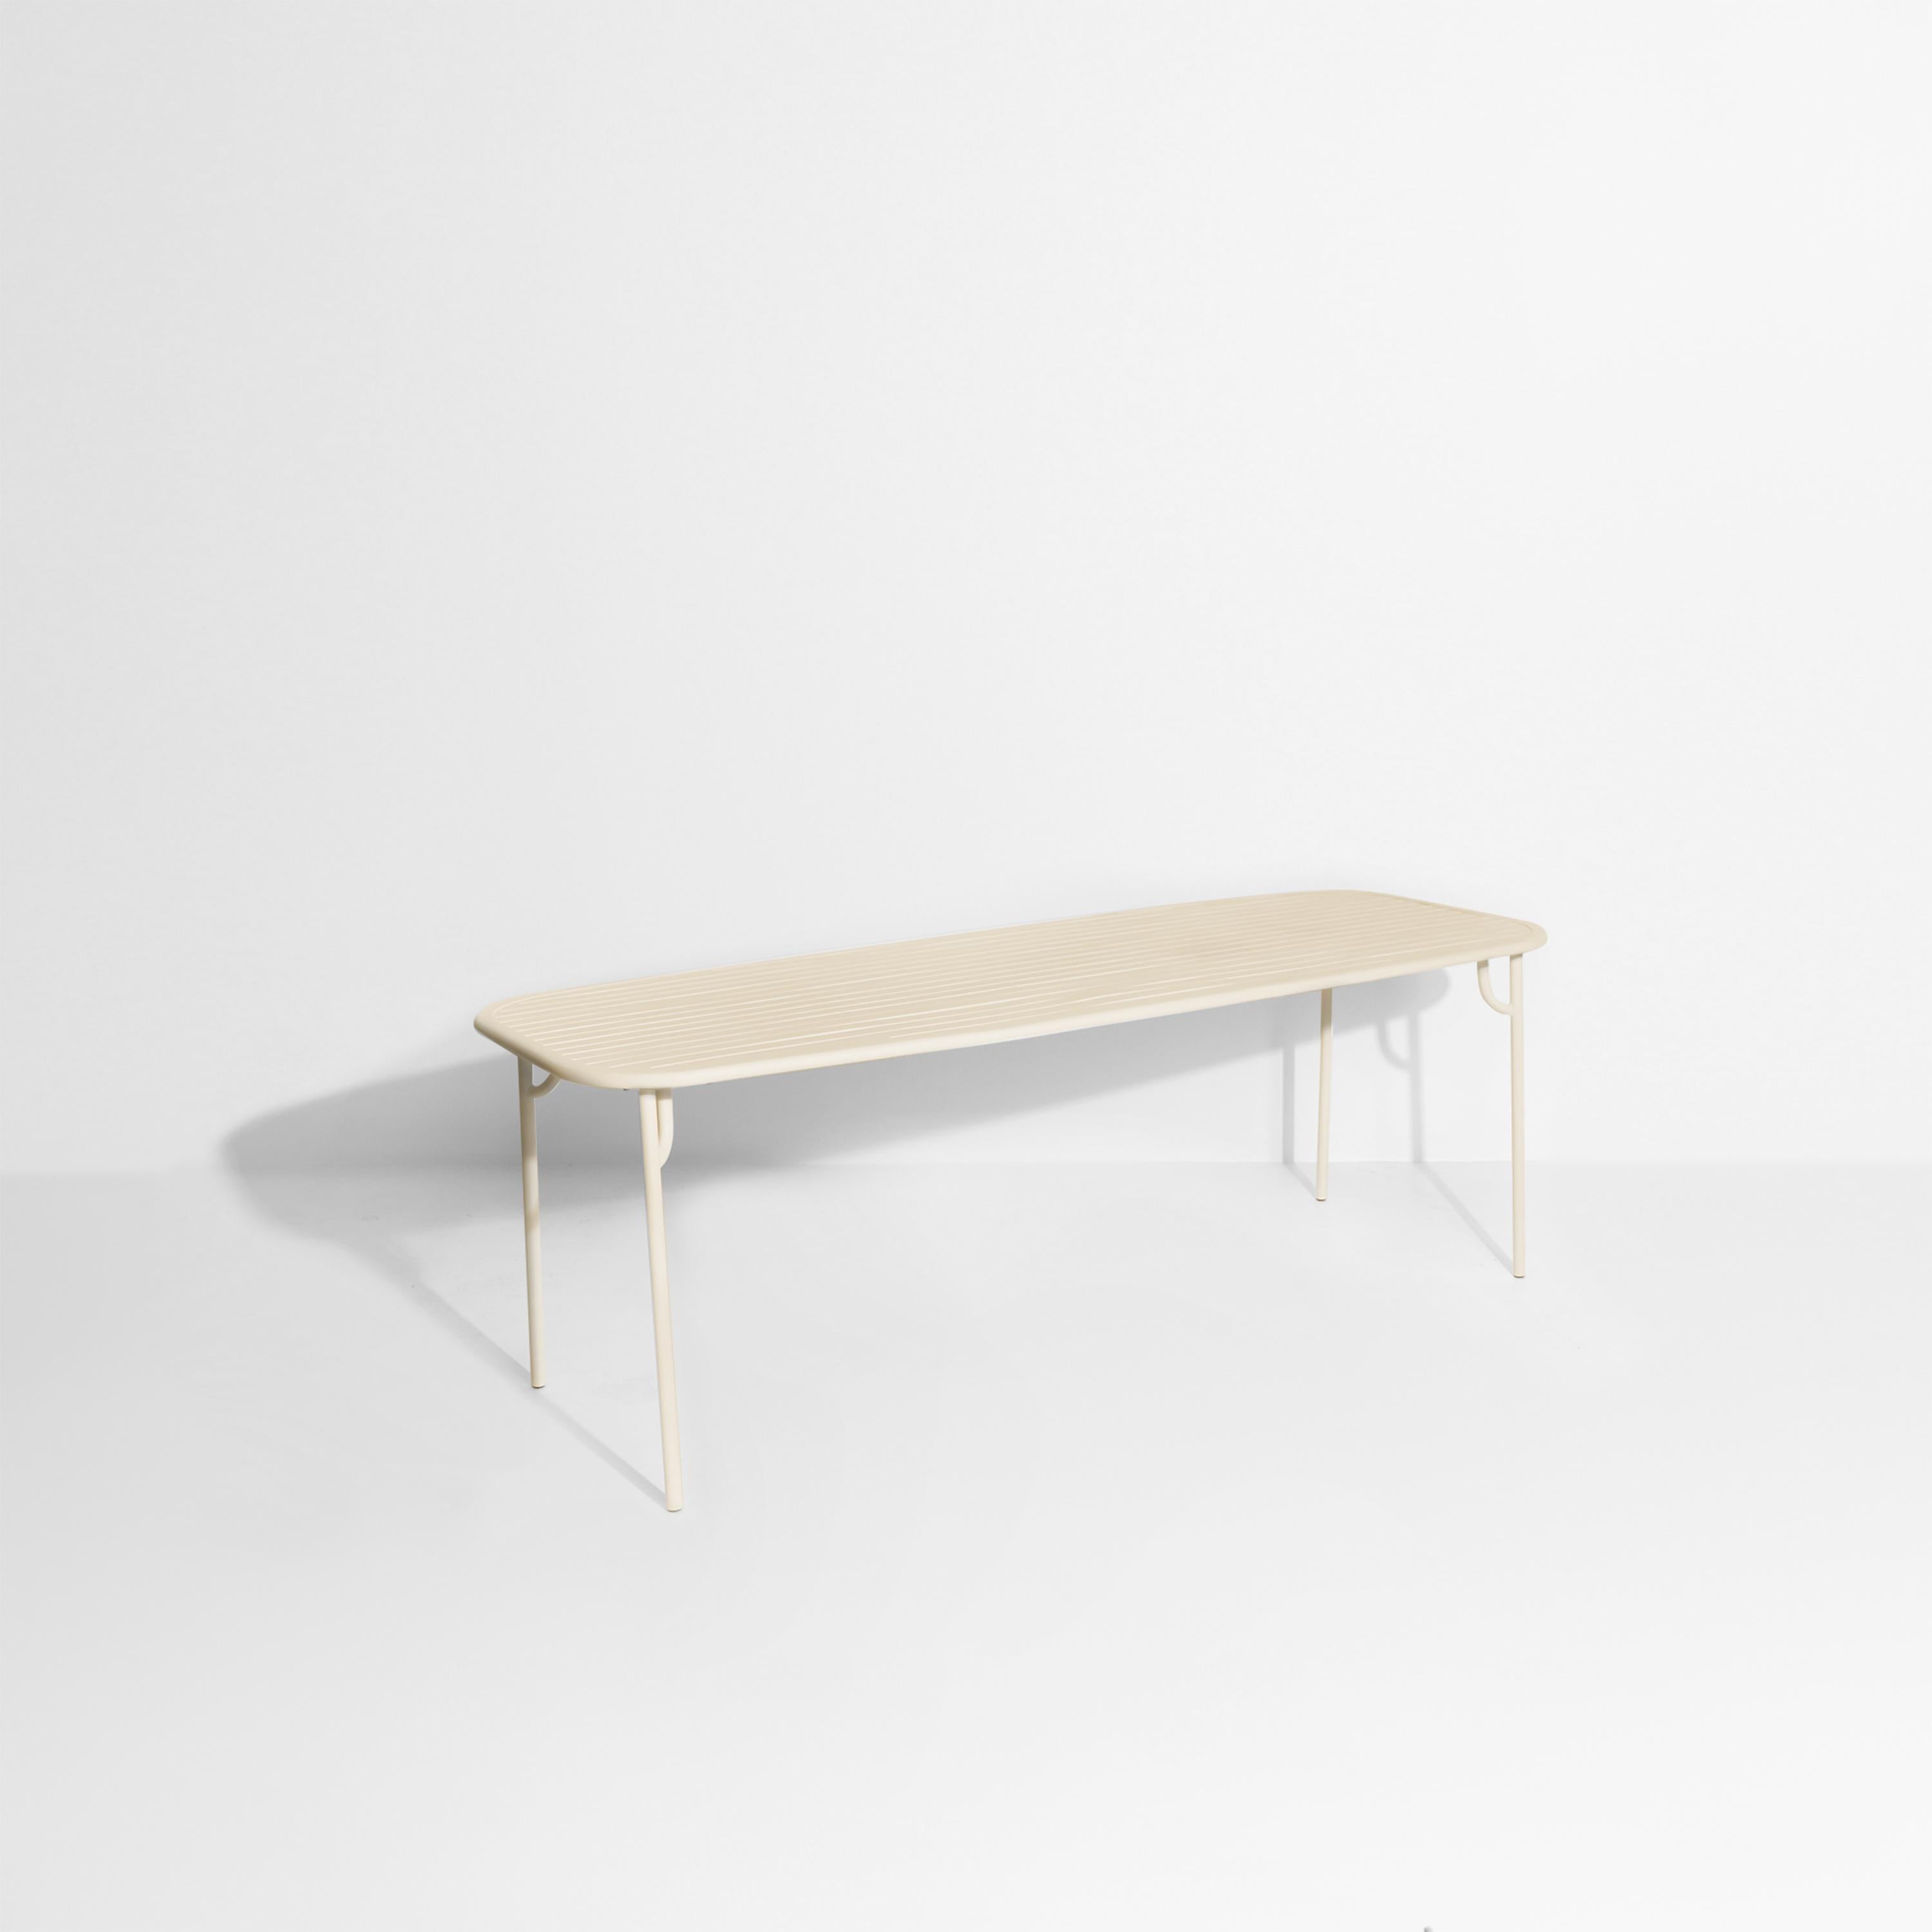 Petite Friture Week-End Large Rectangular Dining Table in Ivory Aluminium with Slats by Studio BrichetZiegler, 2017

The week-end collection is a full range of outdoor furniture, in aluminium grained epoxy paint, matt finish, that includes 18